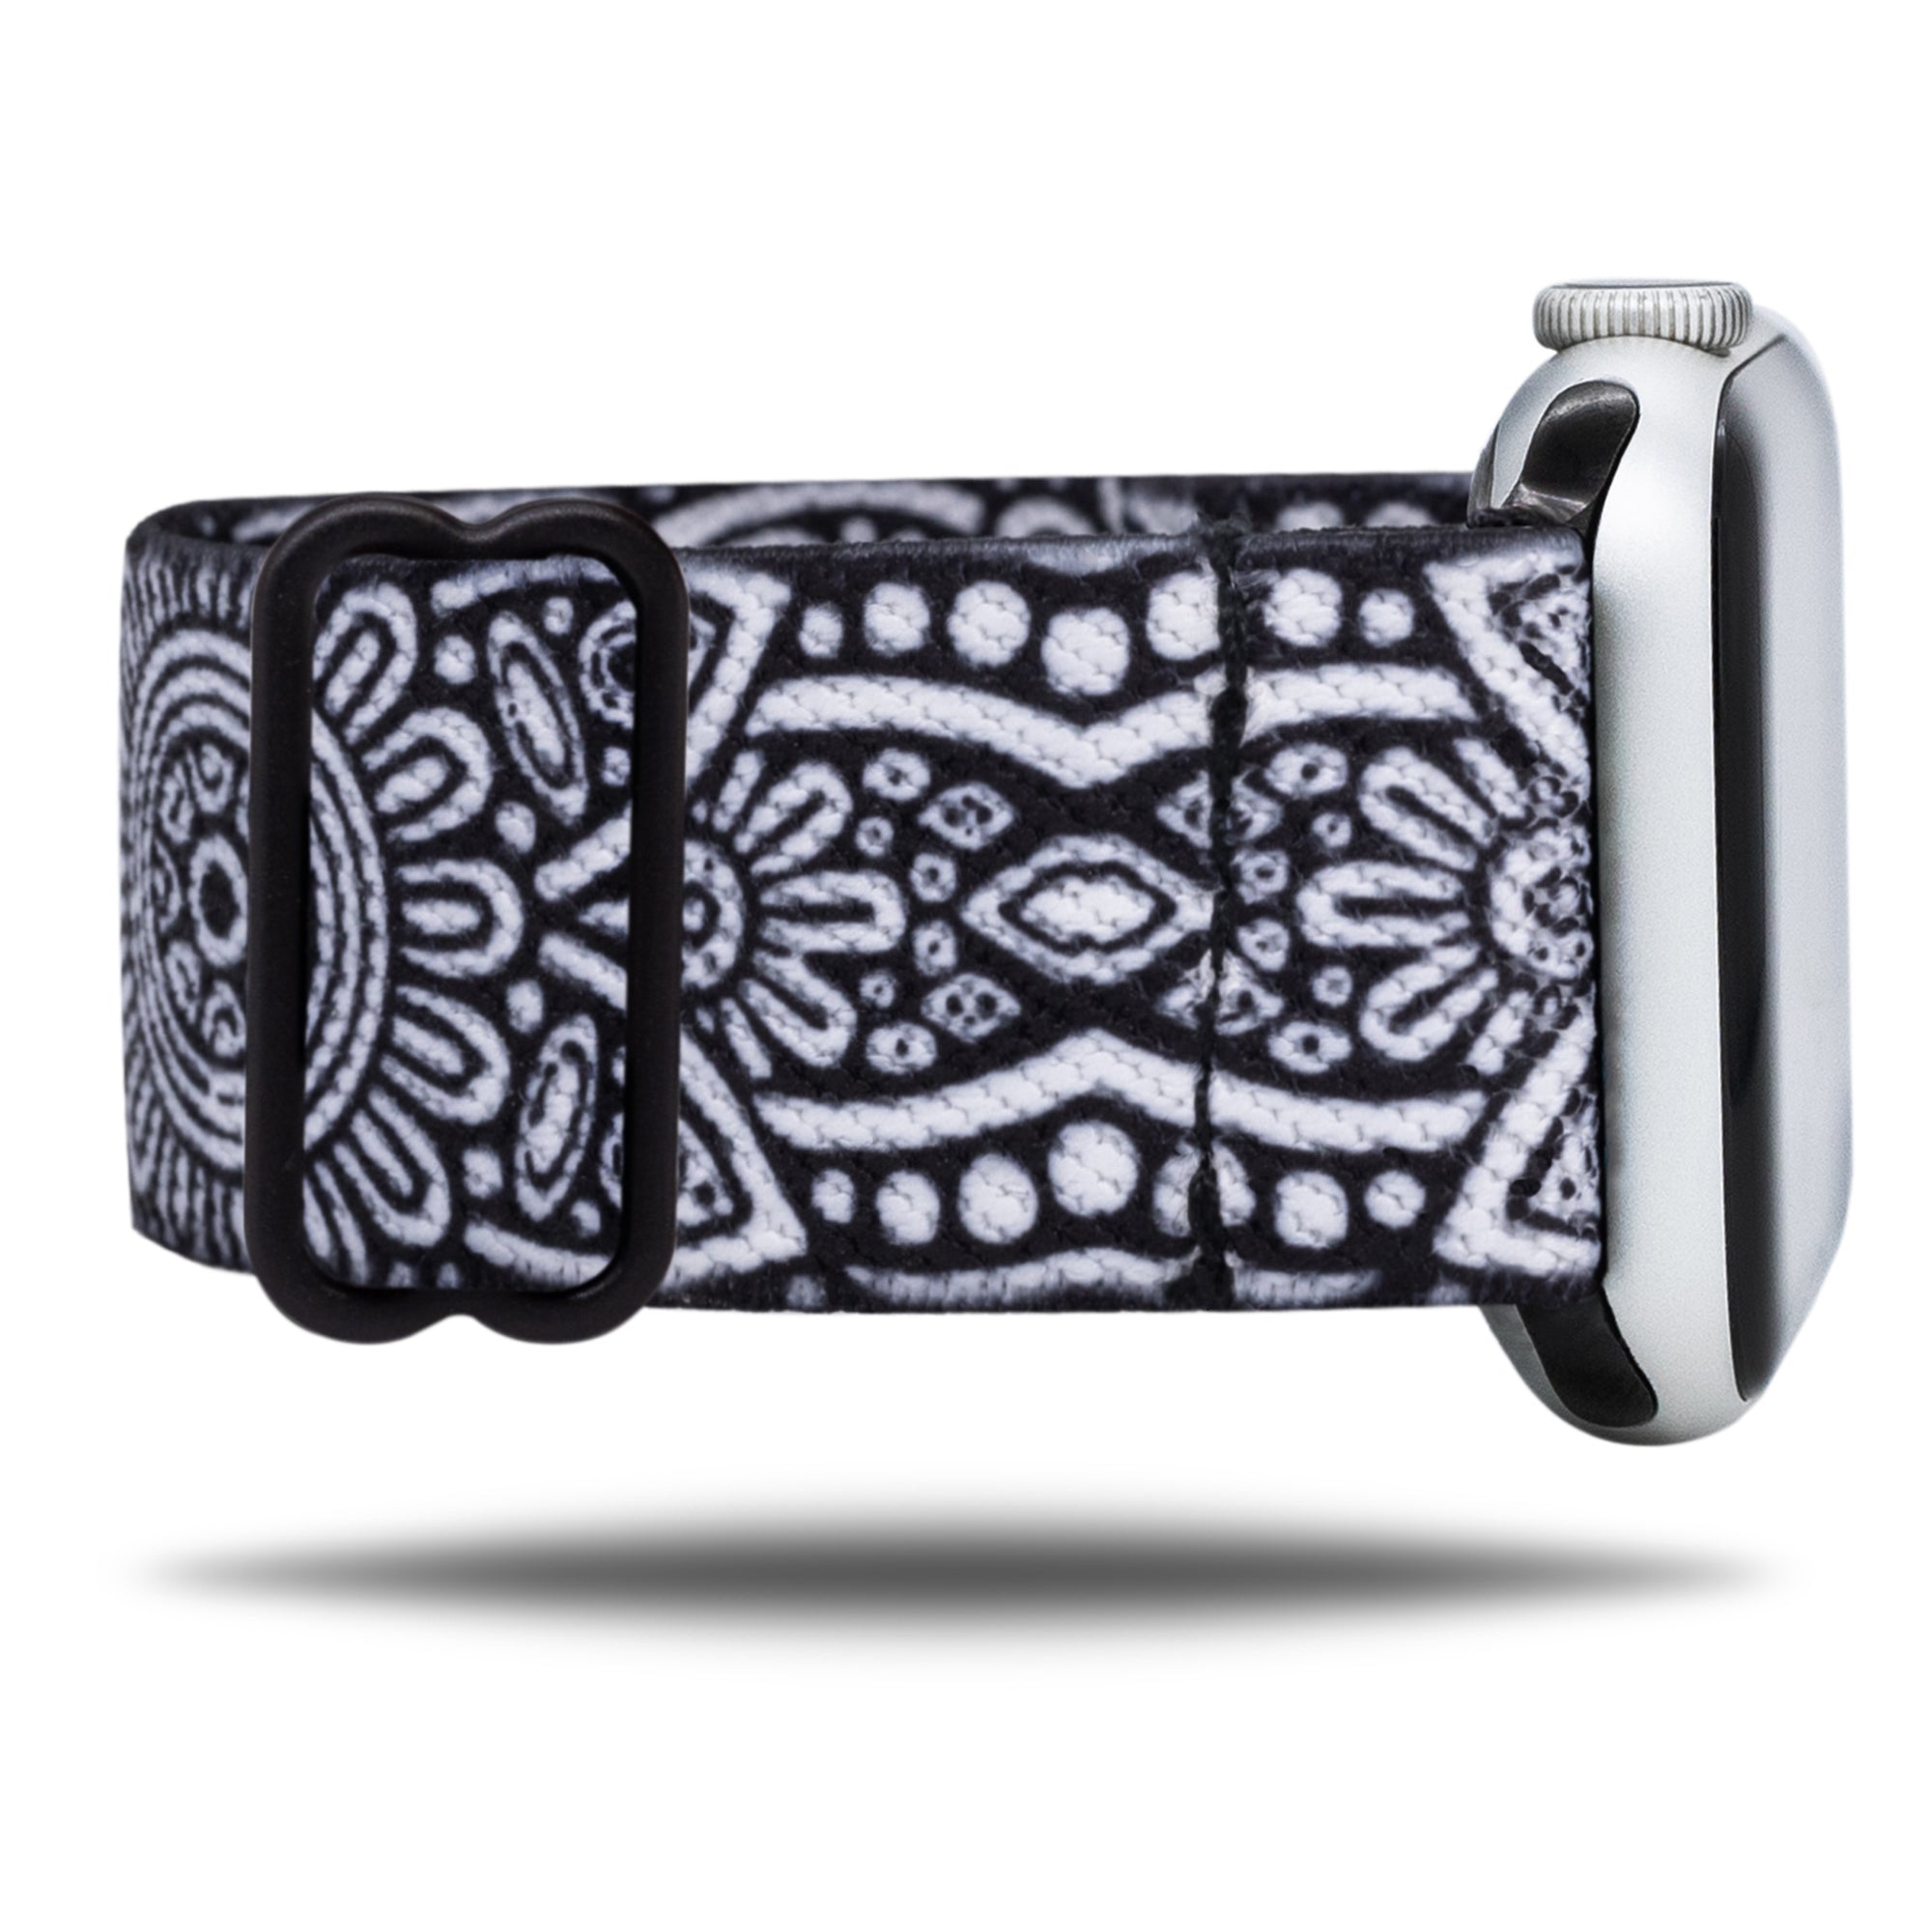 Smiley Braxley Apple Watch Band in best sellers section